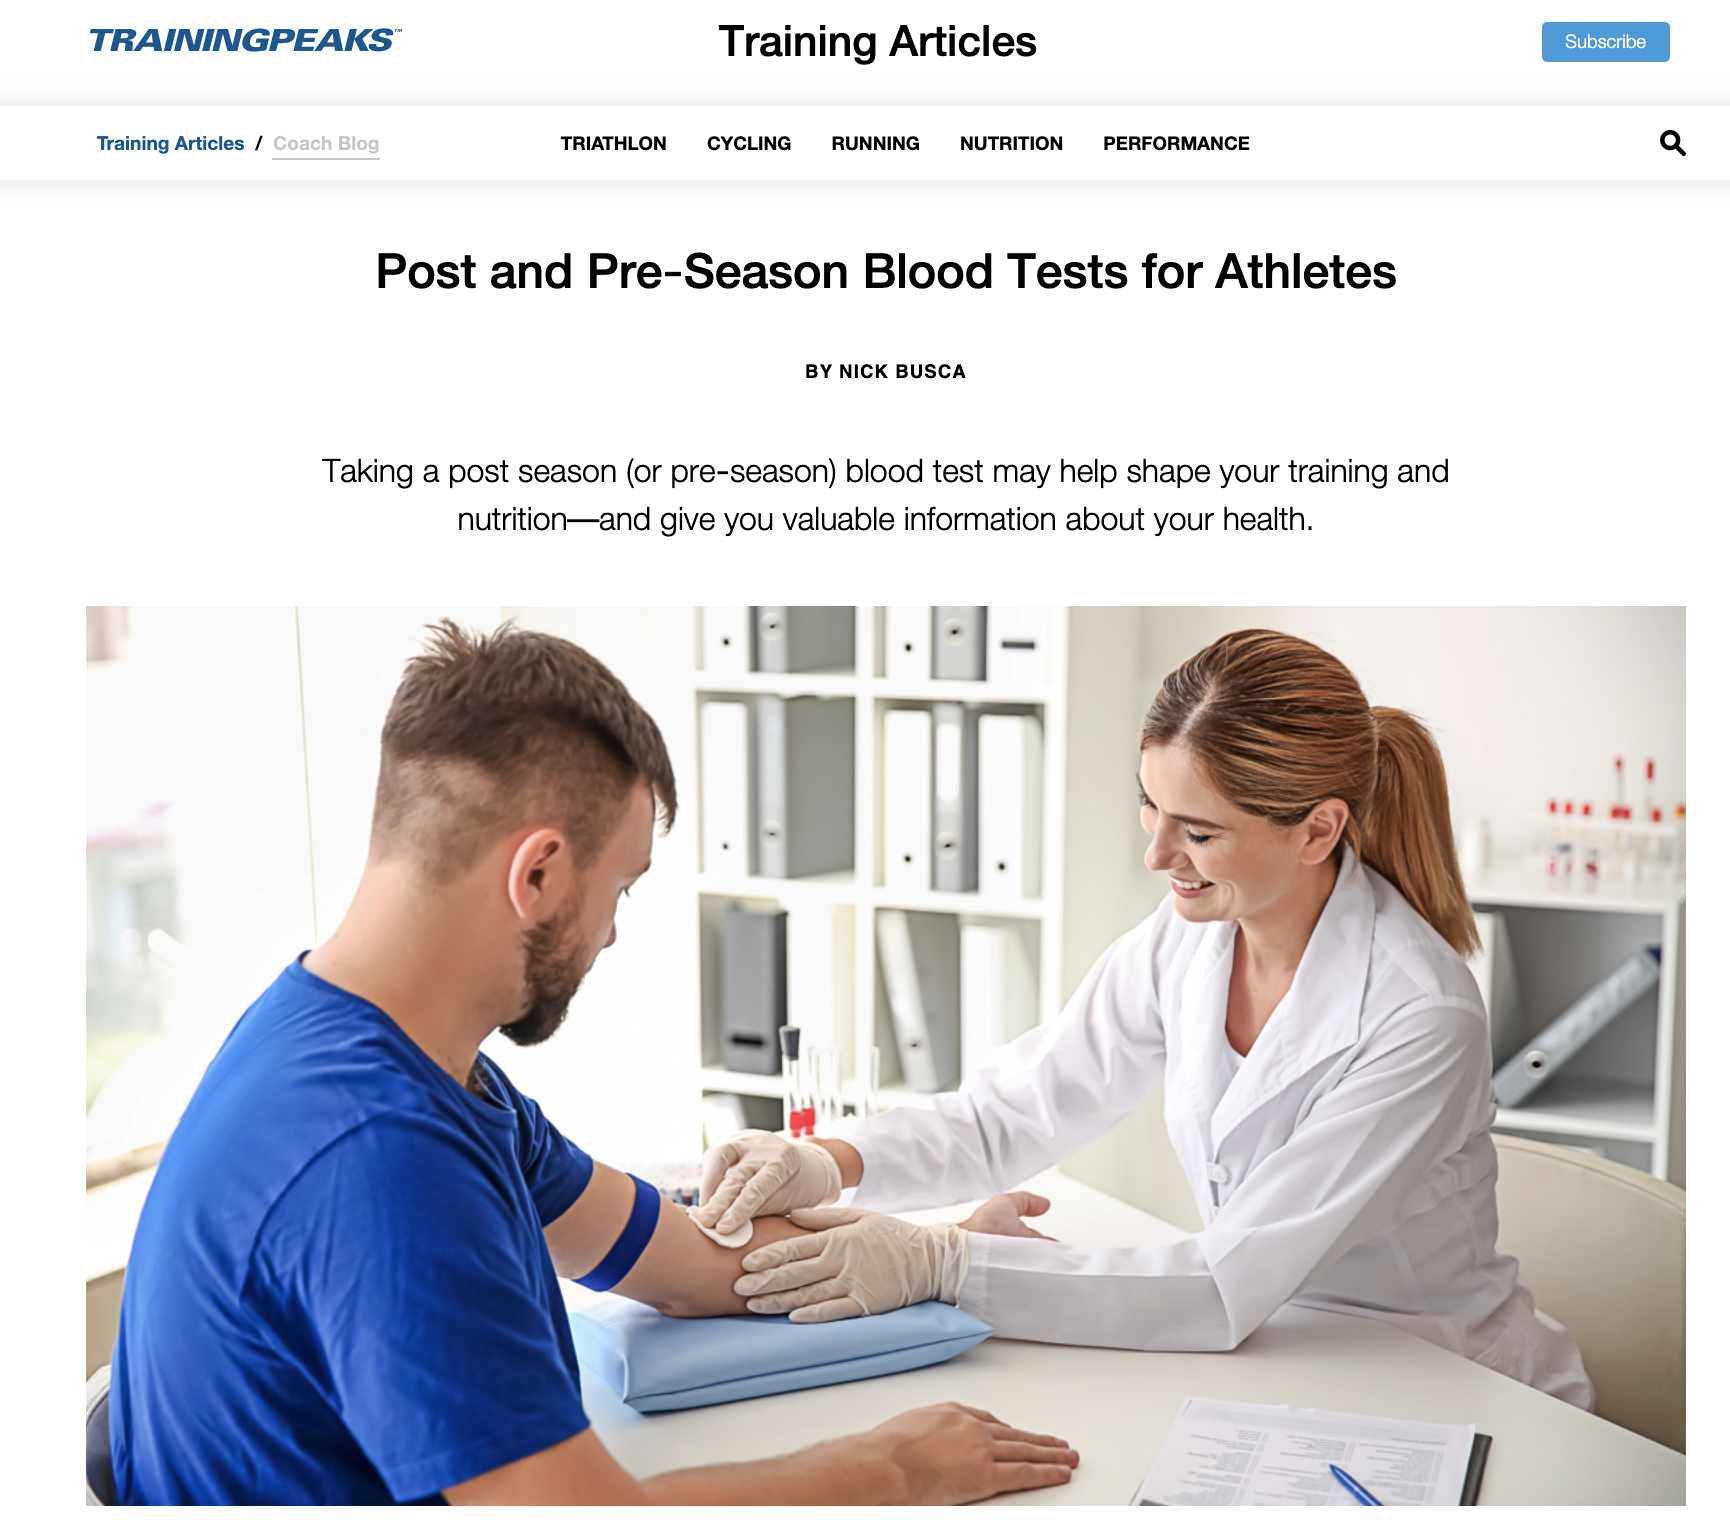 Post and Pre-Season Blood Tests for Athletes